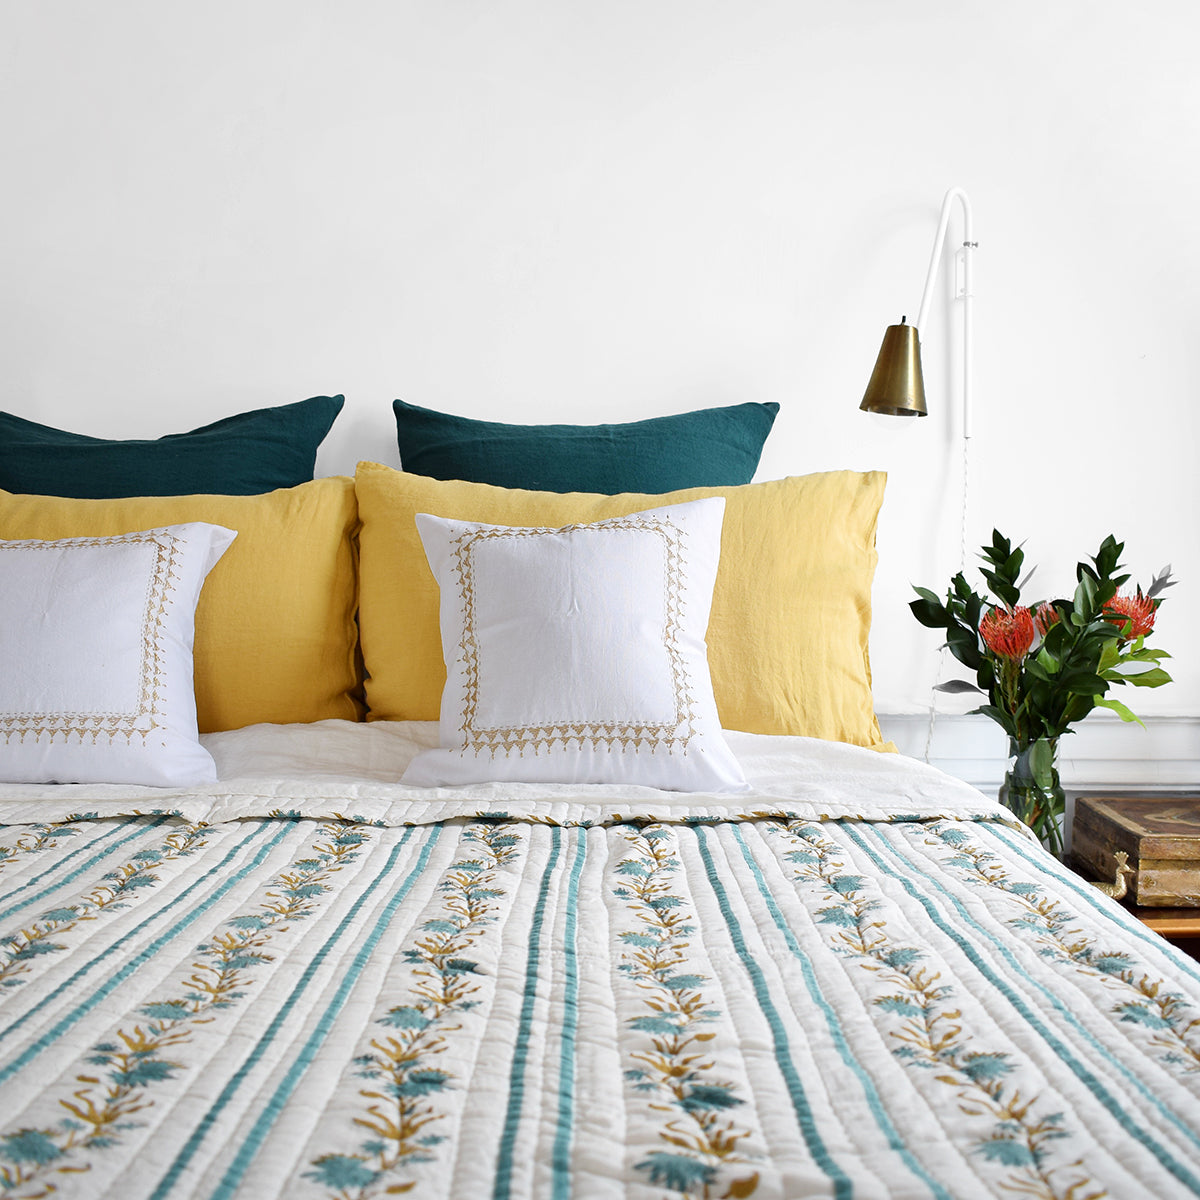 Linge Particulier Vintage Green Euro Linen Pillowcase Sham with a block printed quilt and gold pillowcases for a colorful linen bedding look in deep teal green - Collyer&#39;s Mansion